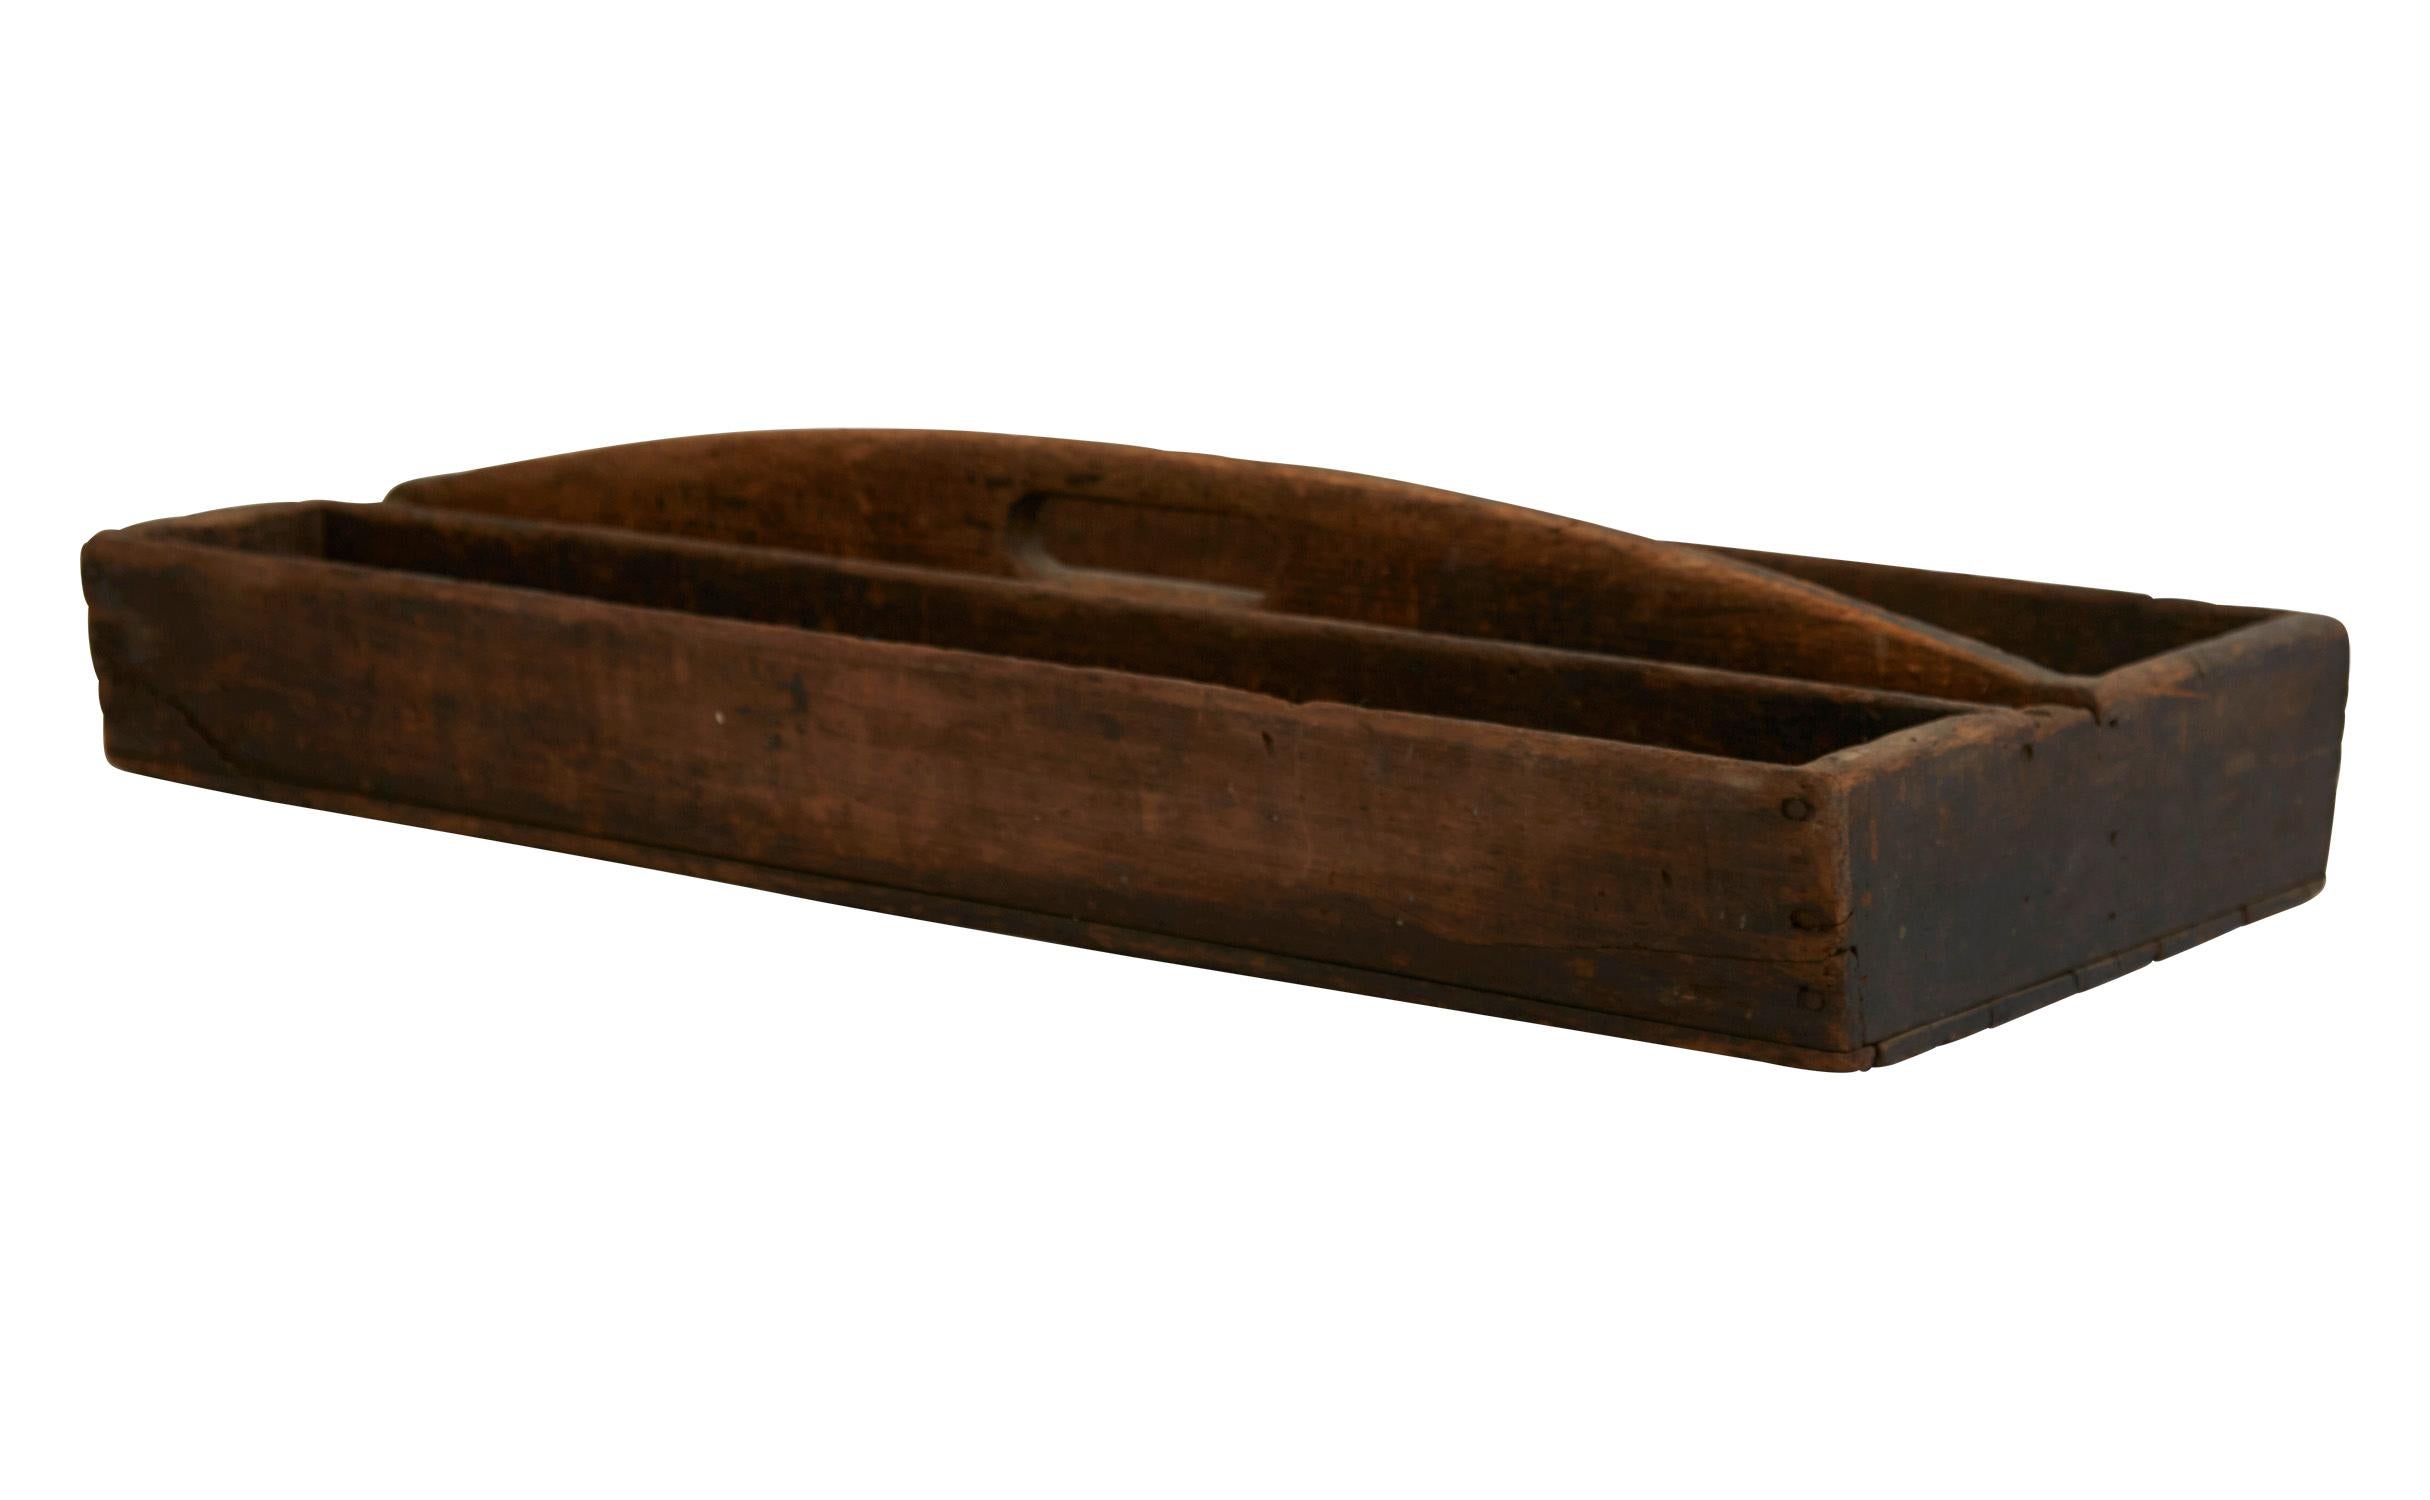 Our vintage wood caddy was made in America in the mid-20th century. Handcrafted from wood, it features a carrying handle and an attached divider on one side. Sturdy and still functional, it is in good rustic condition with scratches and marks